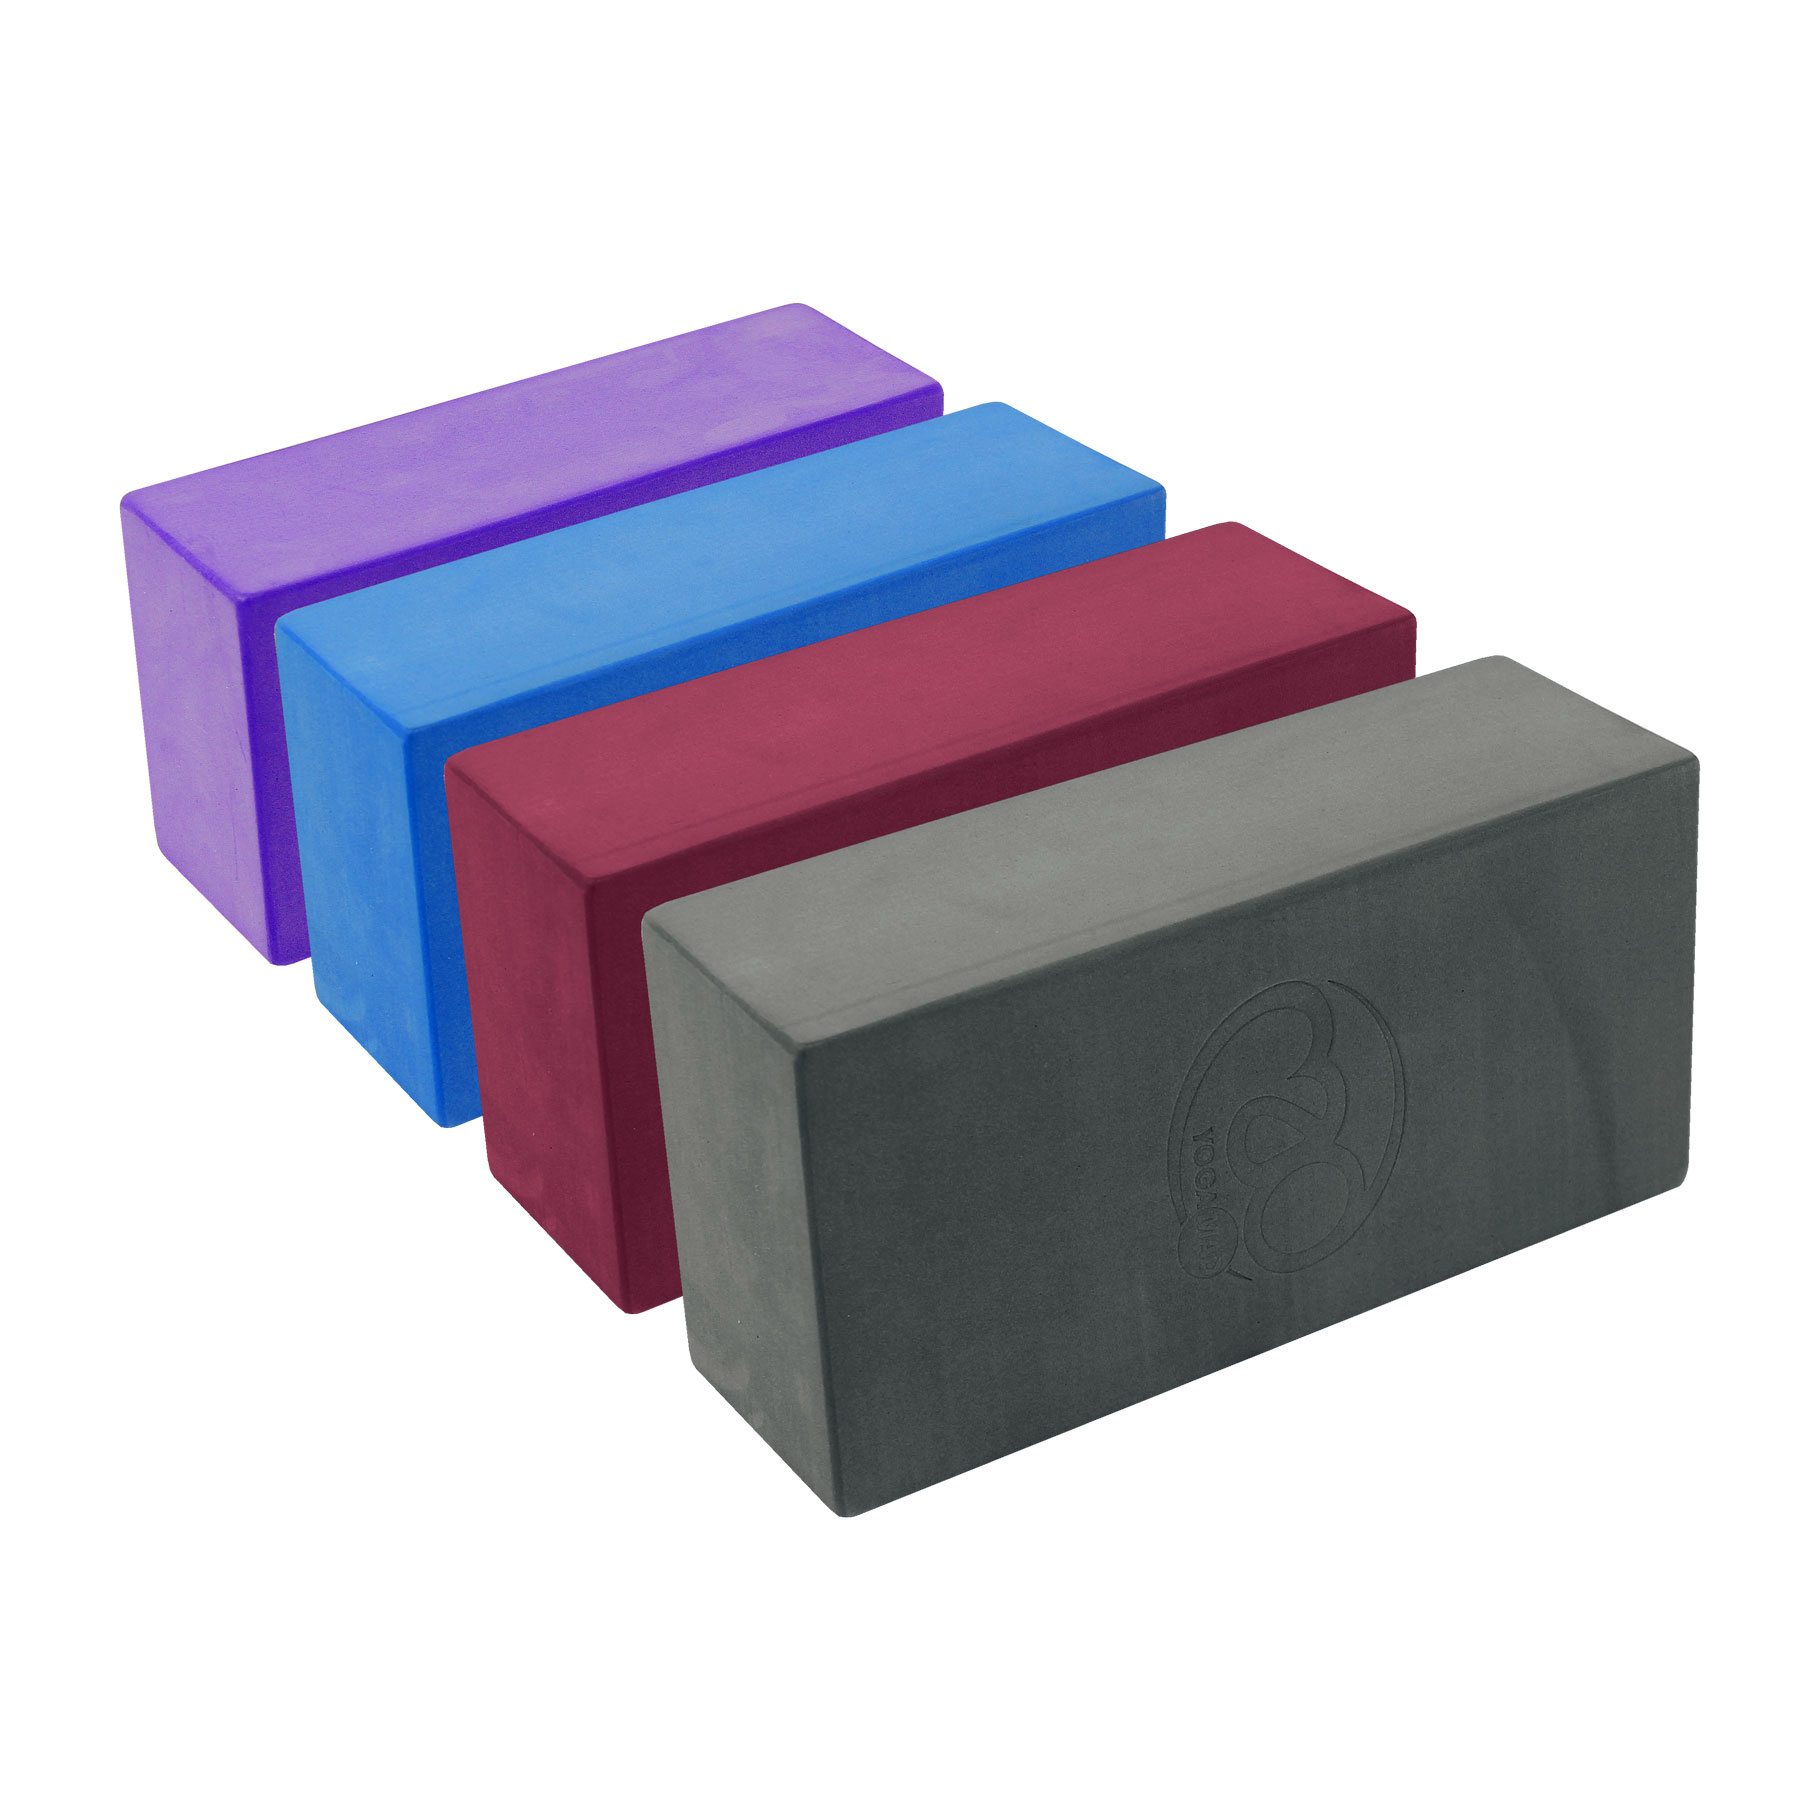 Full Yoga Block by Yoga-Mad, Support & Alignment